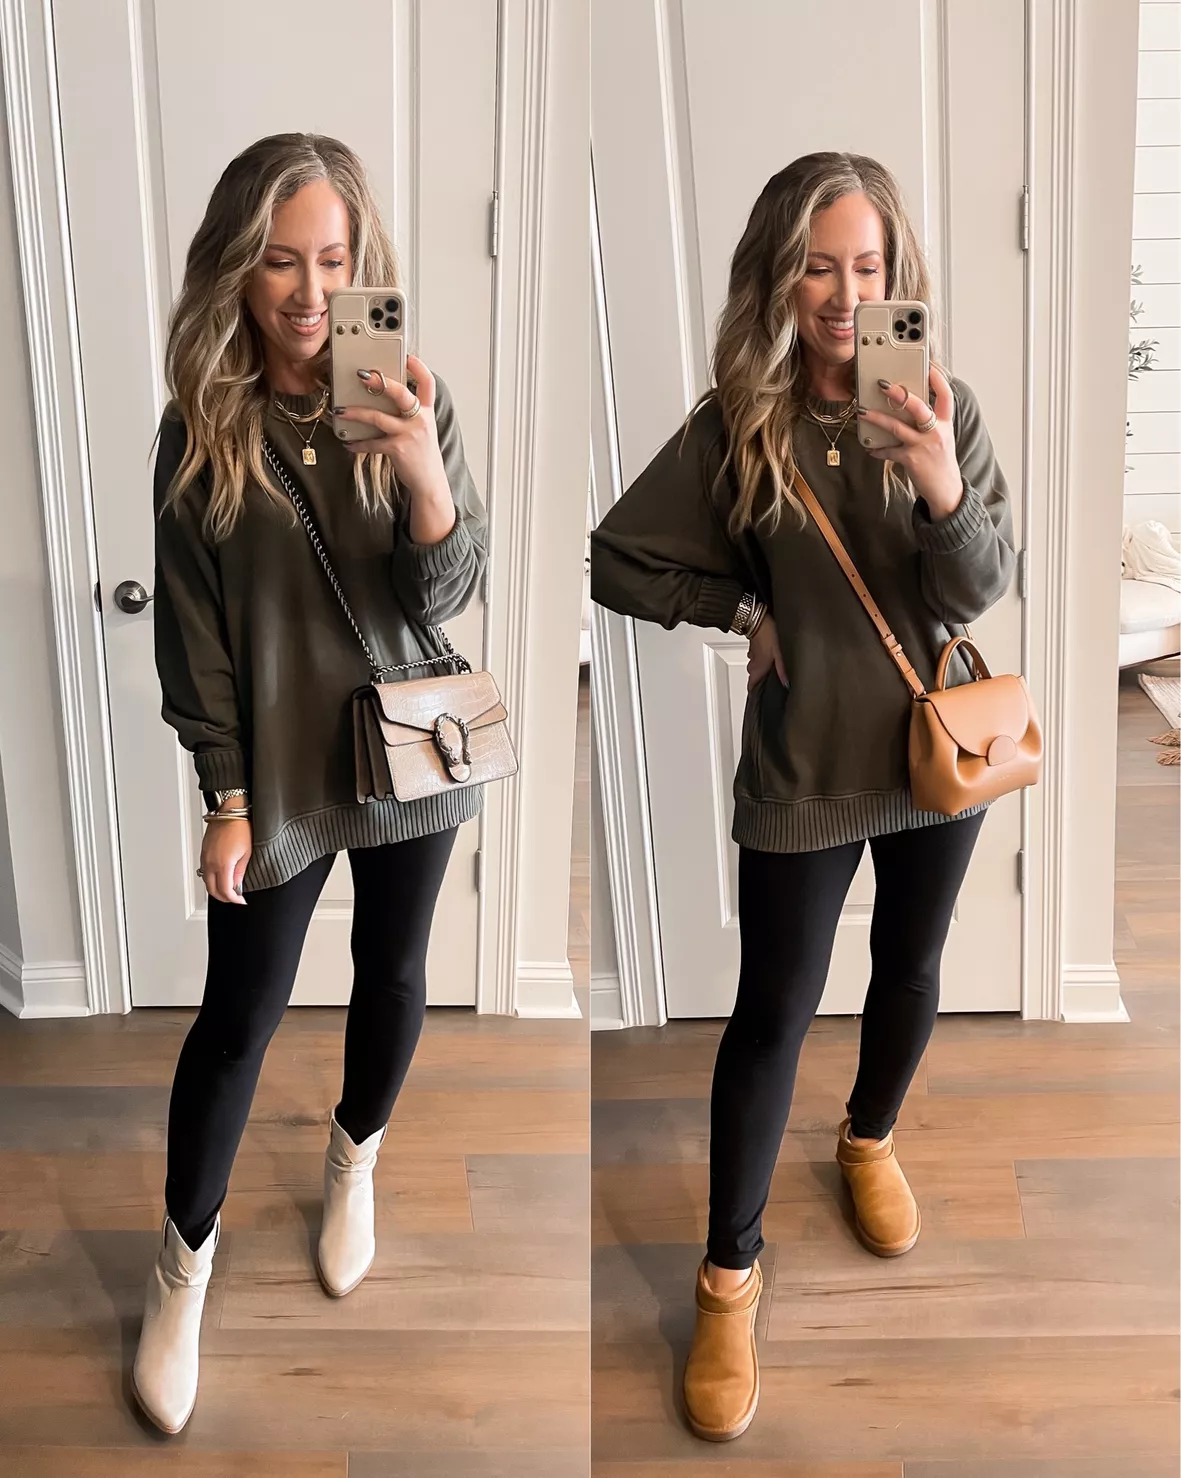 Black Leggings with Beige Uggs Fall Outfits (3 ideas & outfits